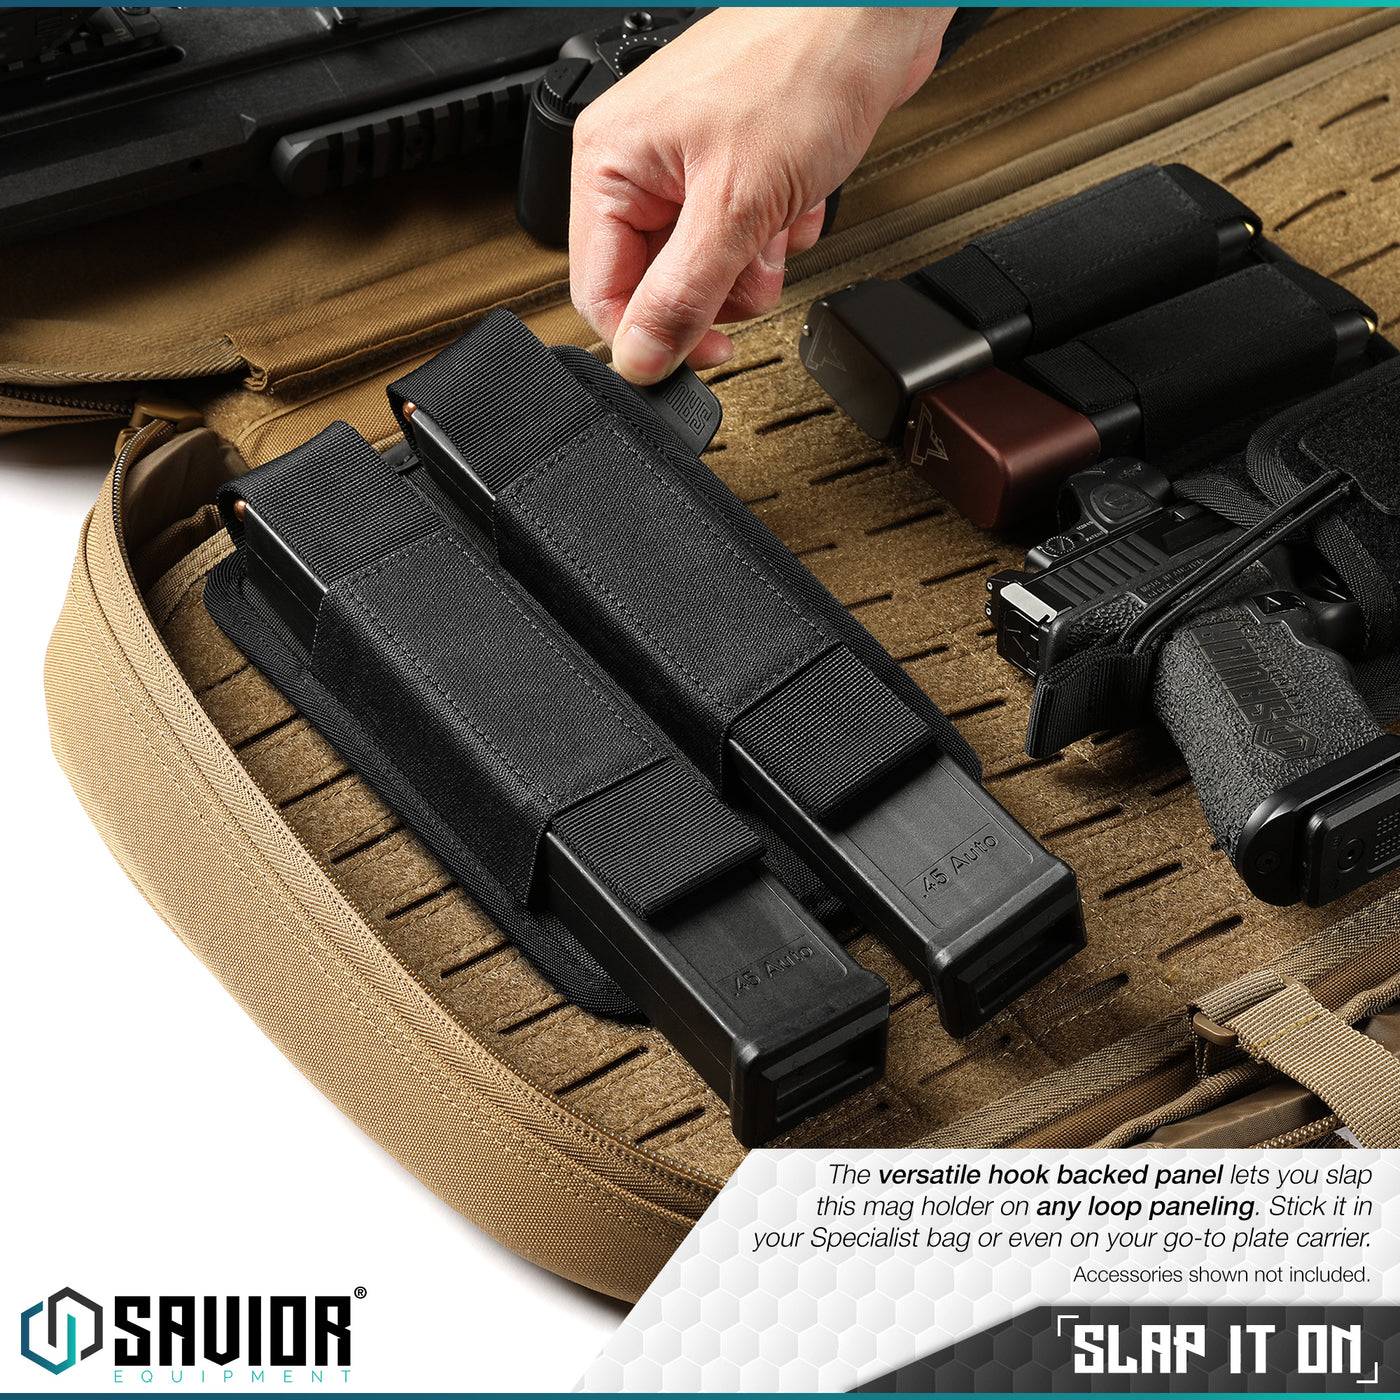 Slap it on - The versatile hook backed panel lets you slap this battery holder on any loop paneling. Stick it in your Specialist bag or even on your go-to plate carrier. Accessories shown not included.